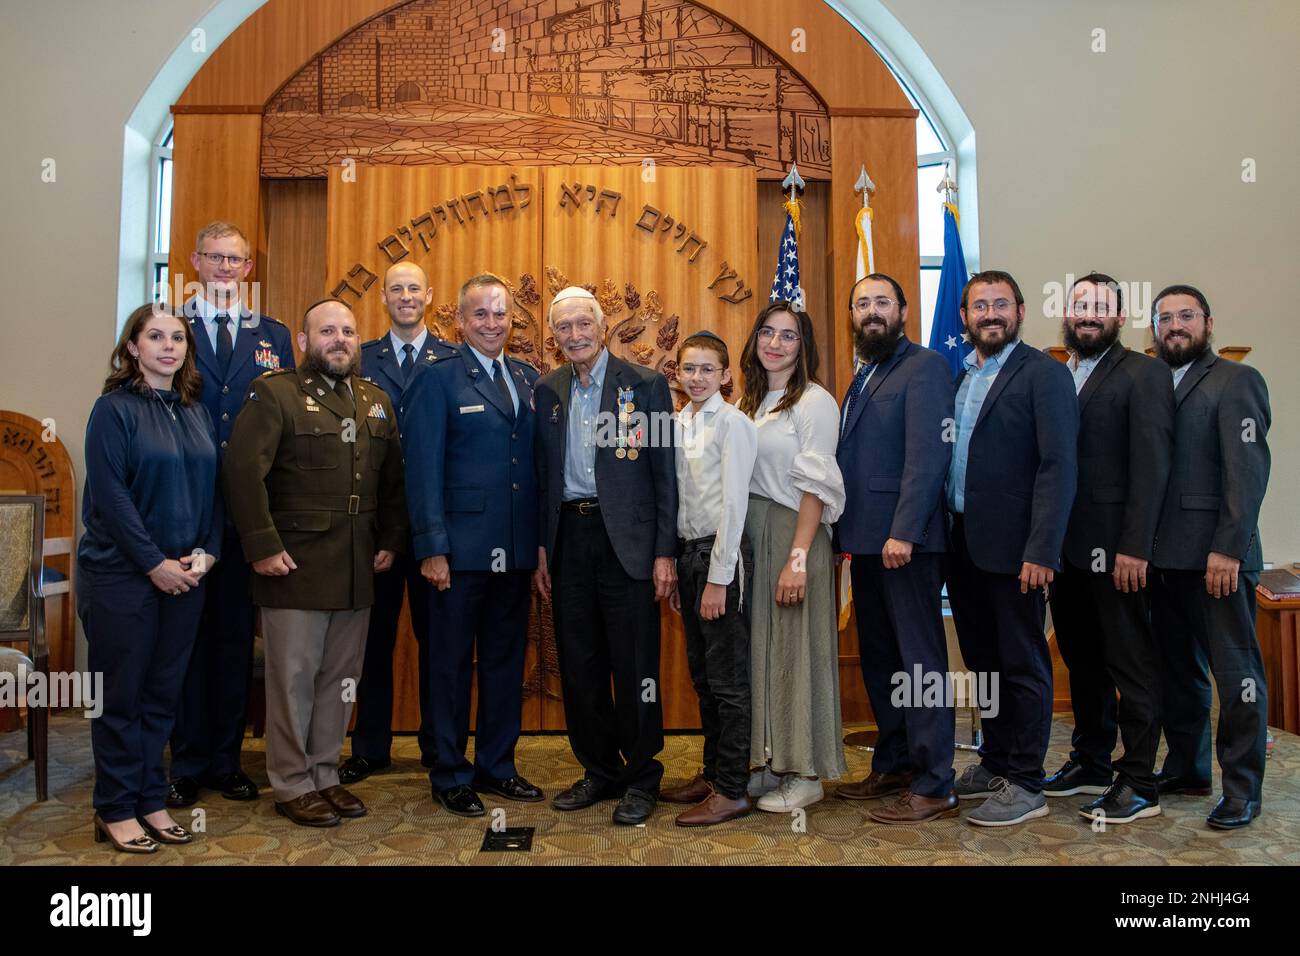 U.S. Army Air Corps 1st Lt. Gerald Teldon (center), retired, poses for a group photo after his awards ceremony for his honorable service as a pilot on July 29, 2022, at the Chabad Center for Jewish Life and Learning, San Antonio, Texas. Teldon, born in the Bronx, N.Y., in 1924, joined the military in 1944. He completed 62 missions during WWII and the Korean War. Lt. Col. Andrew Stein, 502nd Operations Support Squadron commander, was the presiding officer. The awards presented to Teldon are as follows: the Air Medal; American Campaign Medal; European – African – Middle Eastern Campaign Medal; W Stock Photo